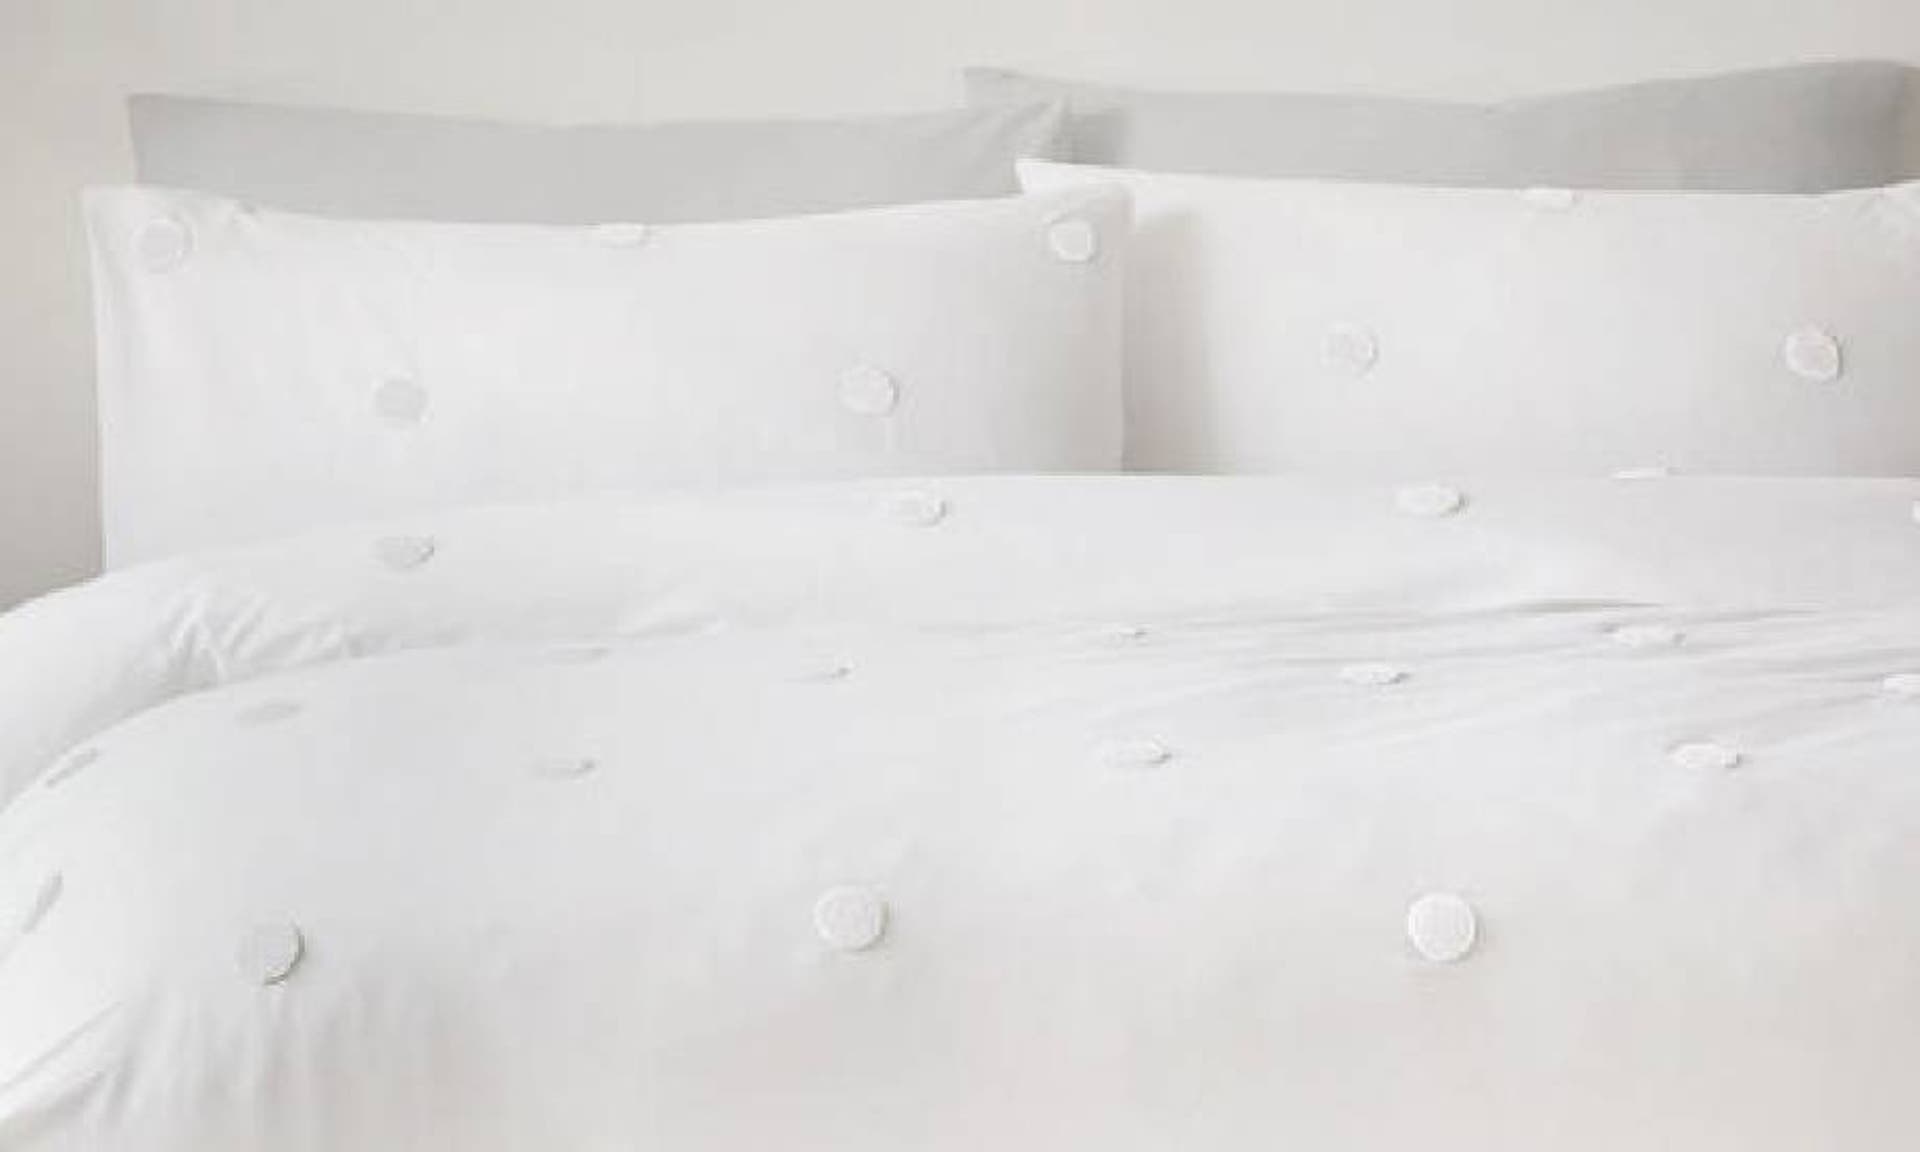  White bedding with white textured spots on a duvet and pillows from Cotton Traders 